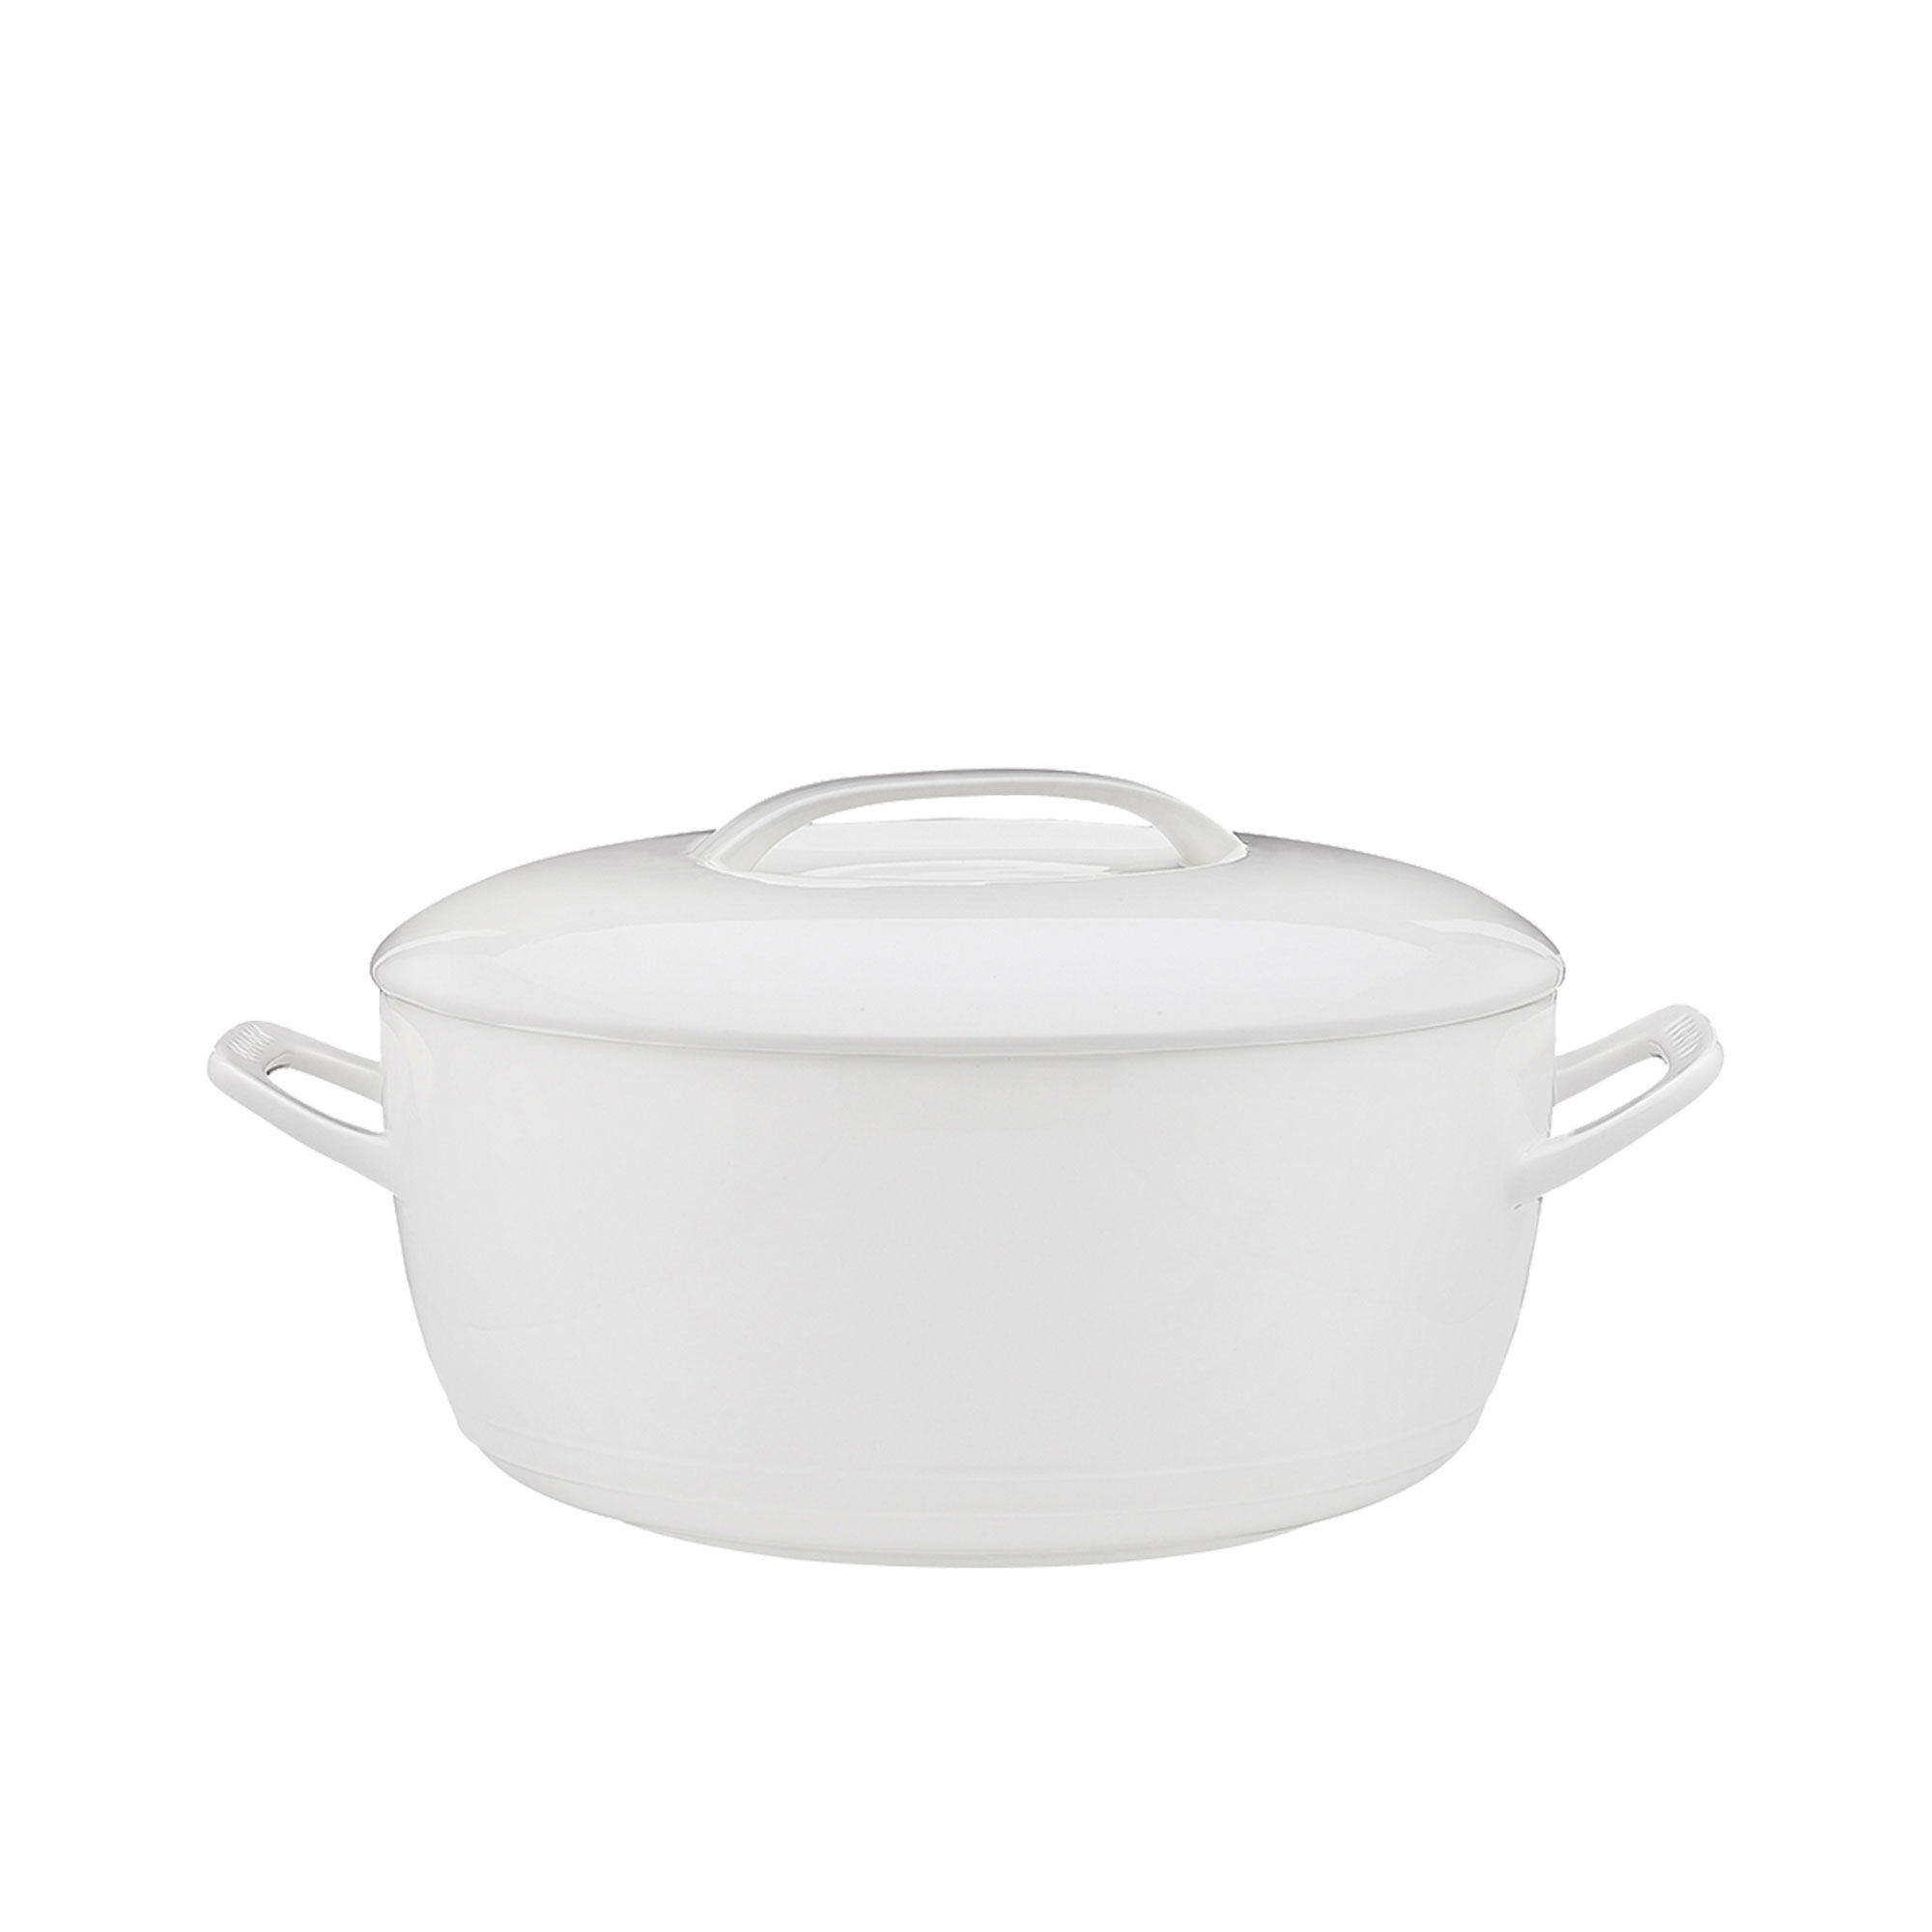 Ecology Signature Casserole with Lid 3.5L White Image 1